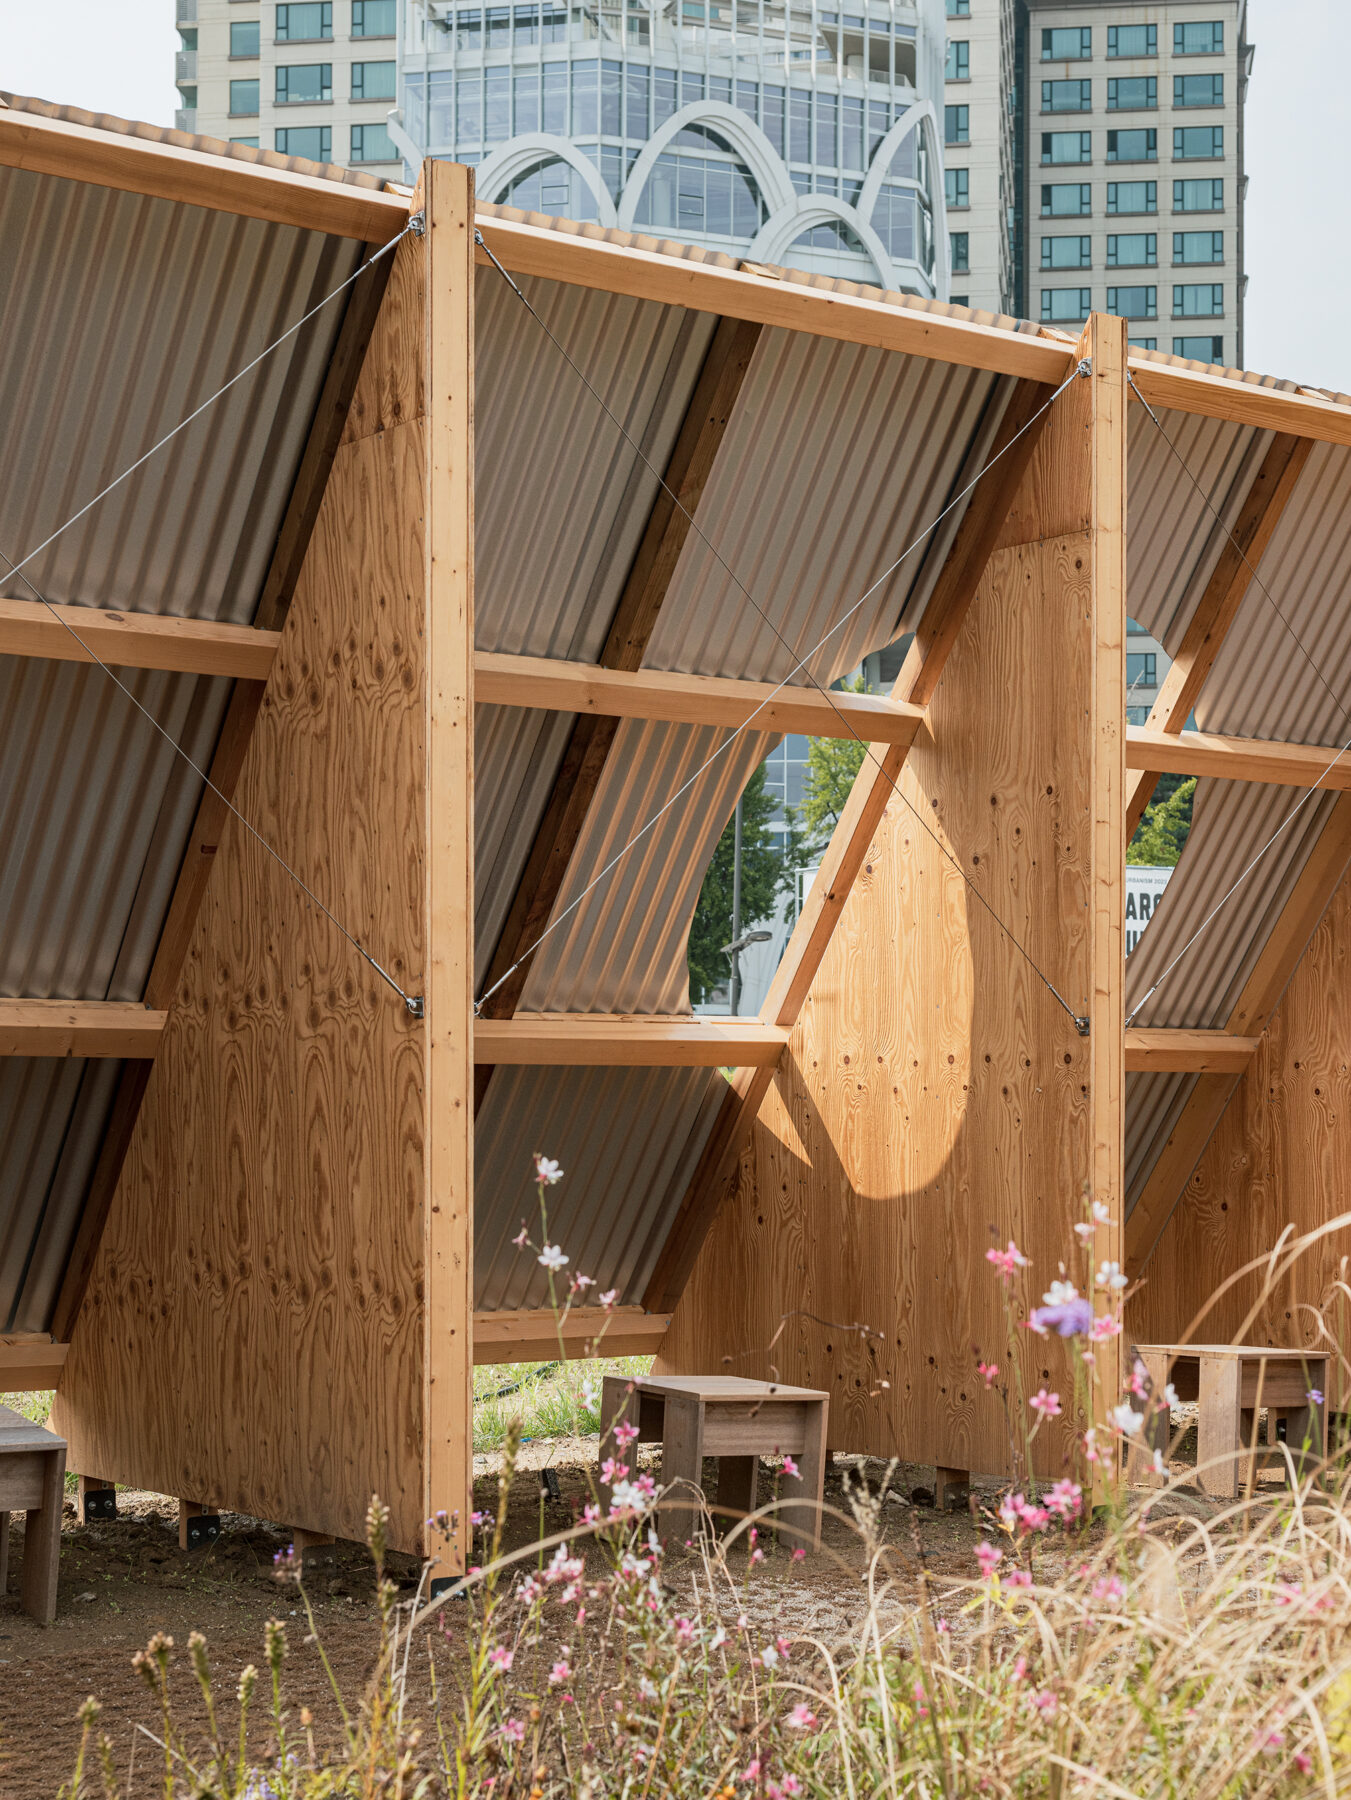 Archisearch The Outdoor Room in Seoul Biennale of Architecture | by Frank Barkow and salazarsequeromedina